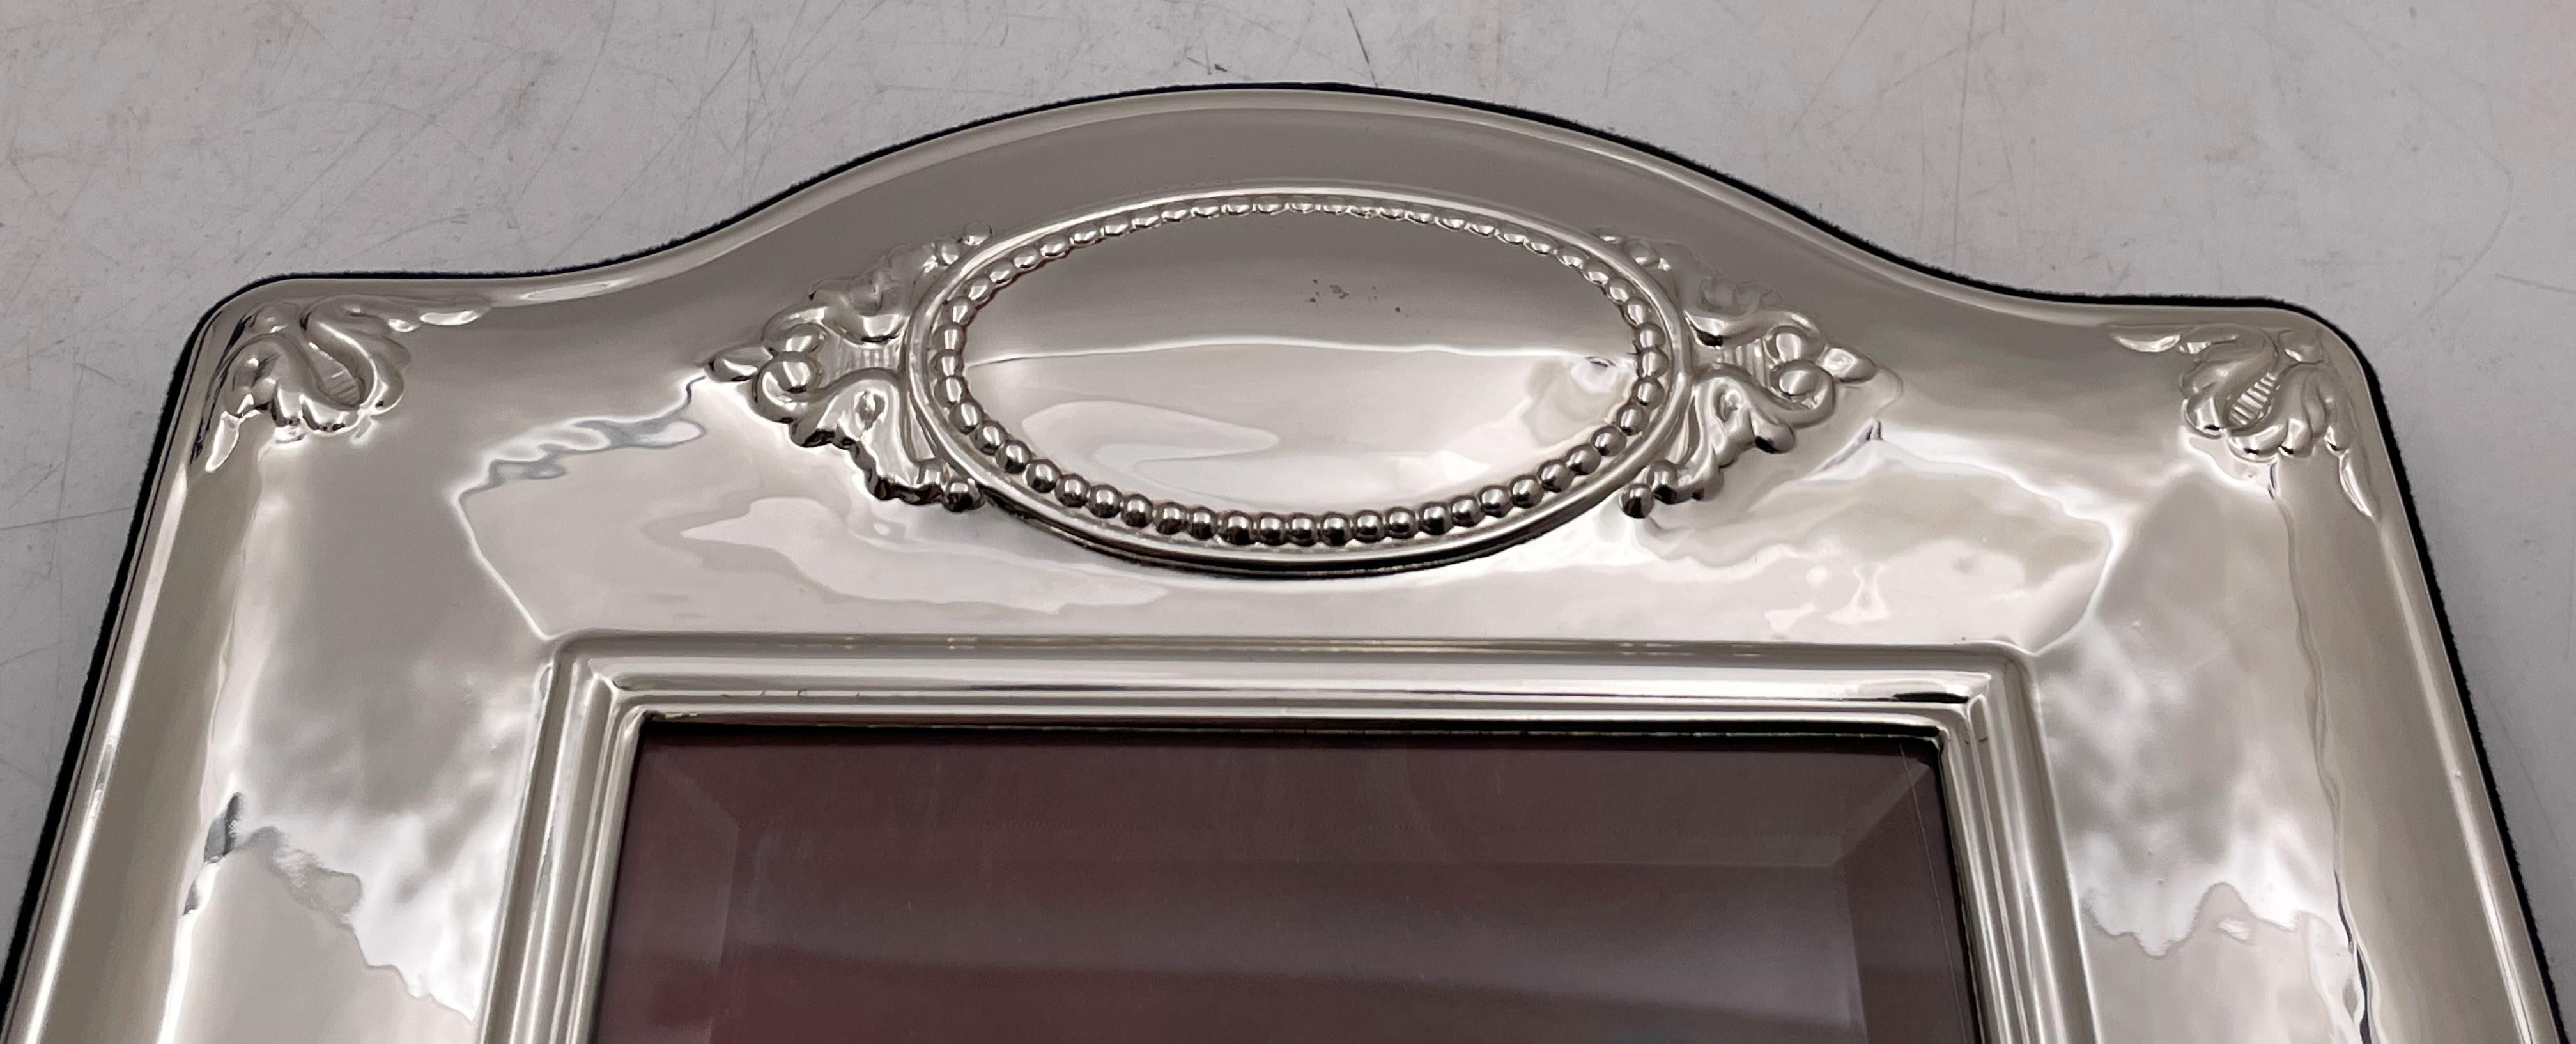 Del Conte Italian Sterling Silver Picture Frame with Cartouche Motif In Excellent Condition For Sale In New York, NY